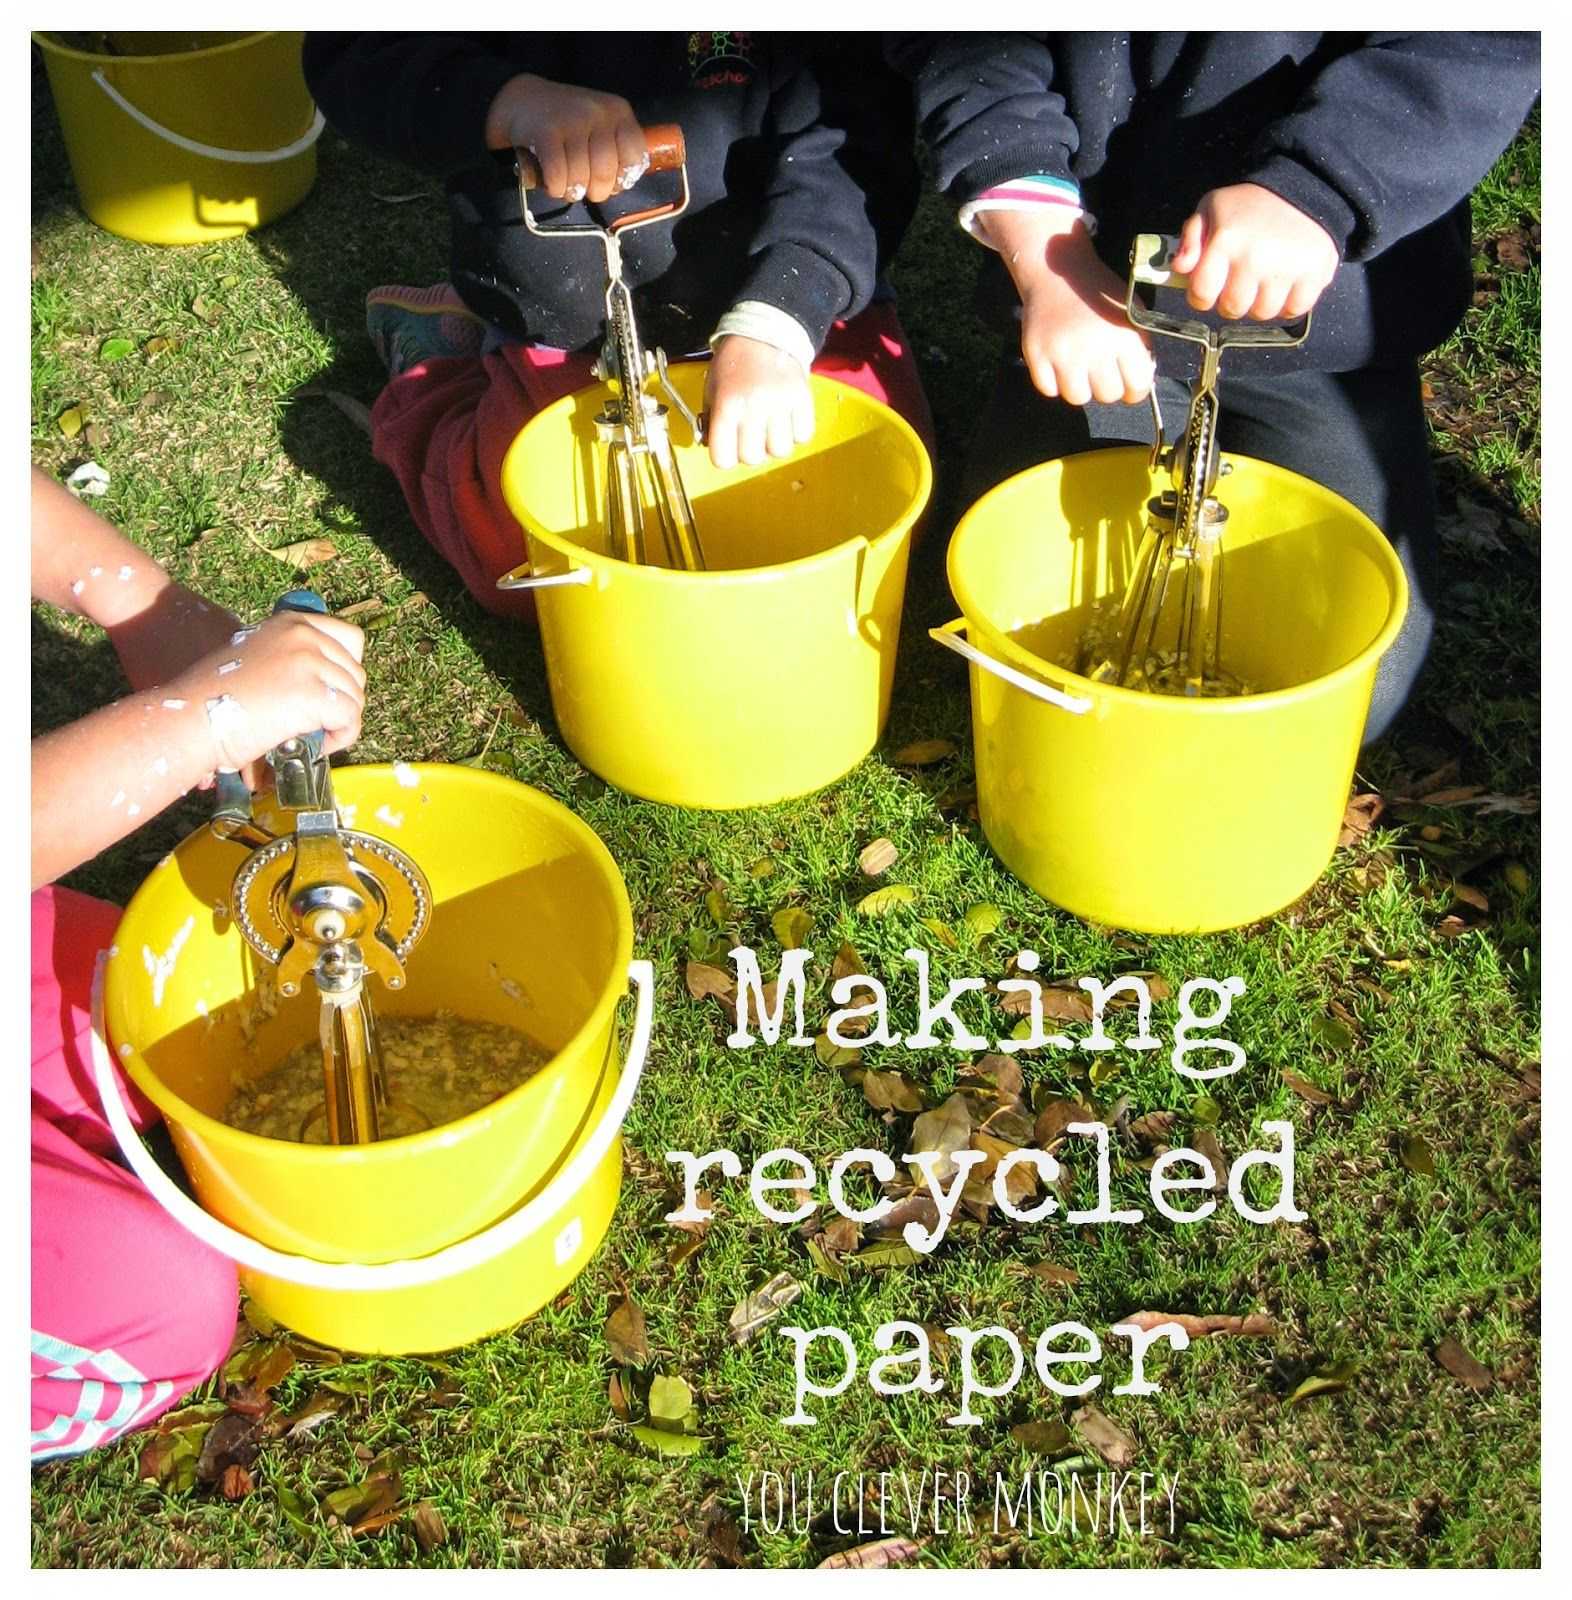 Recycling Worksheets for Kids Also A Hands On Look at How Paper is Made A Perfect Way for Children to